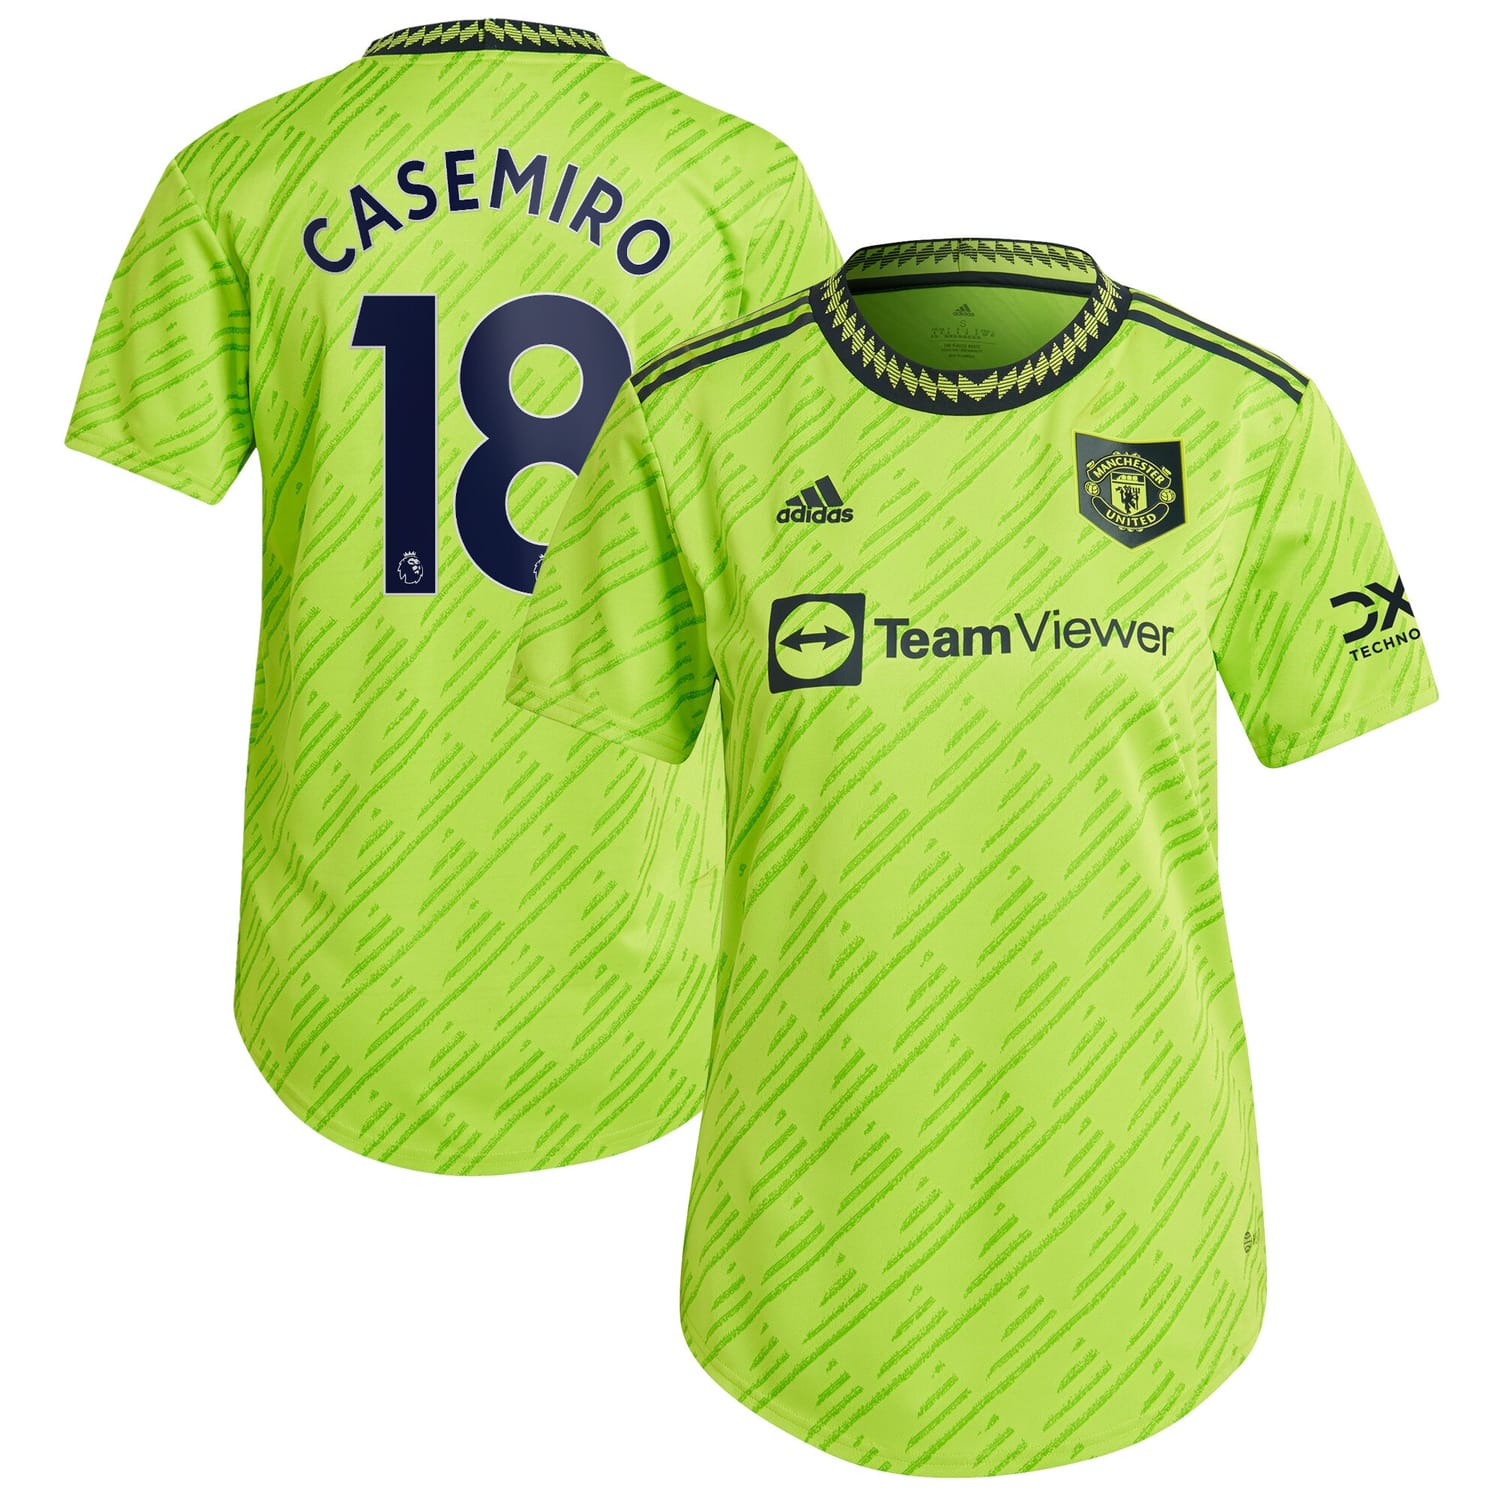 Premier League Manchester United Third Authentic Jersey Shirt 2022-23 player Casemiro 18 printing for Women